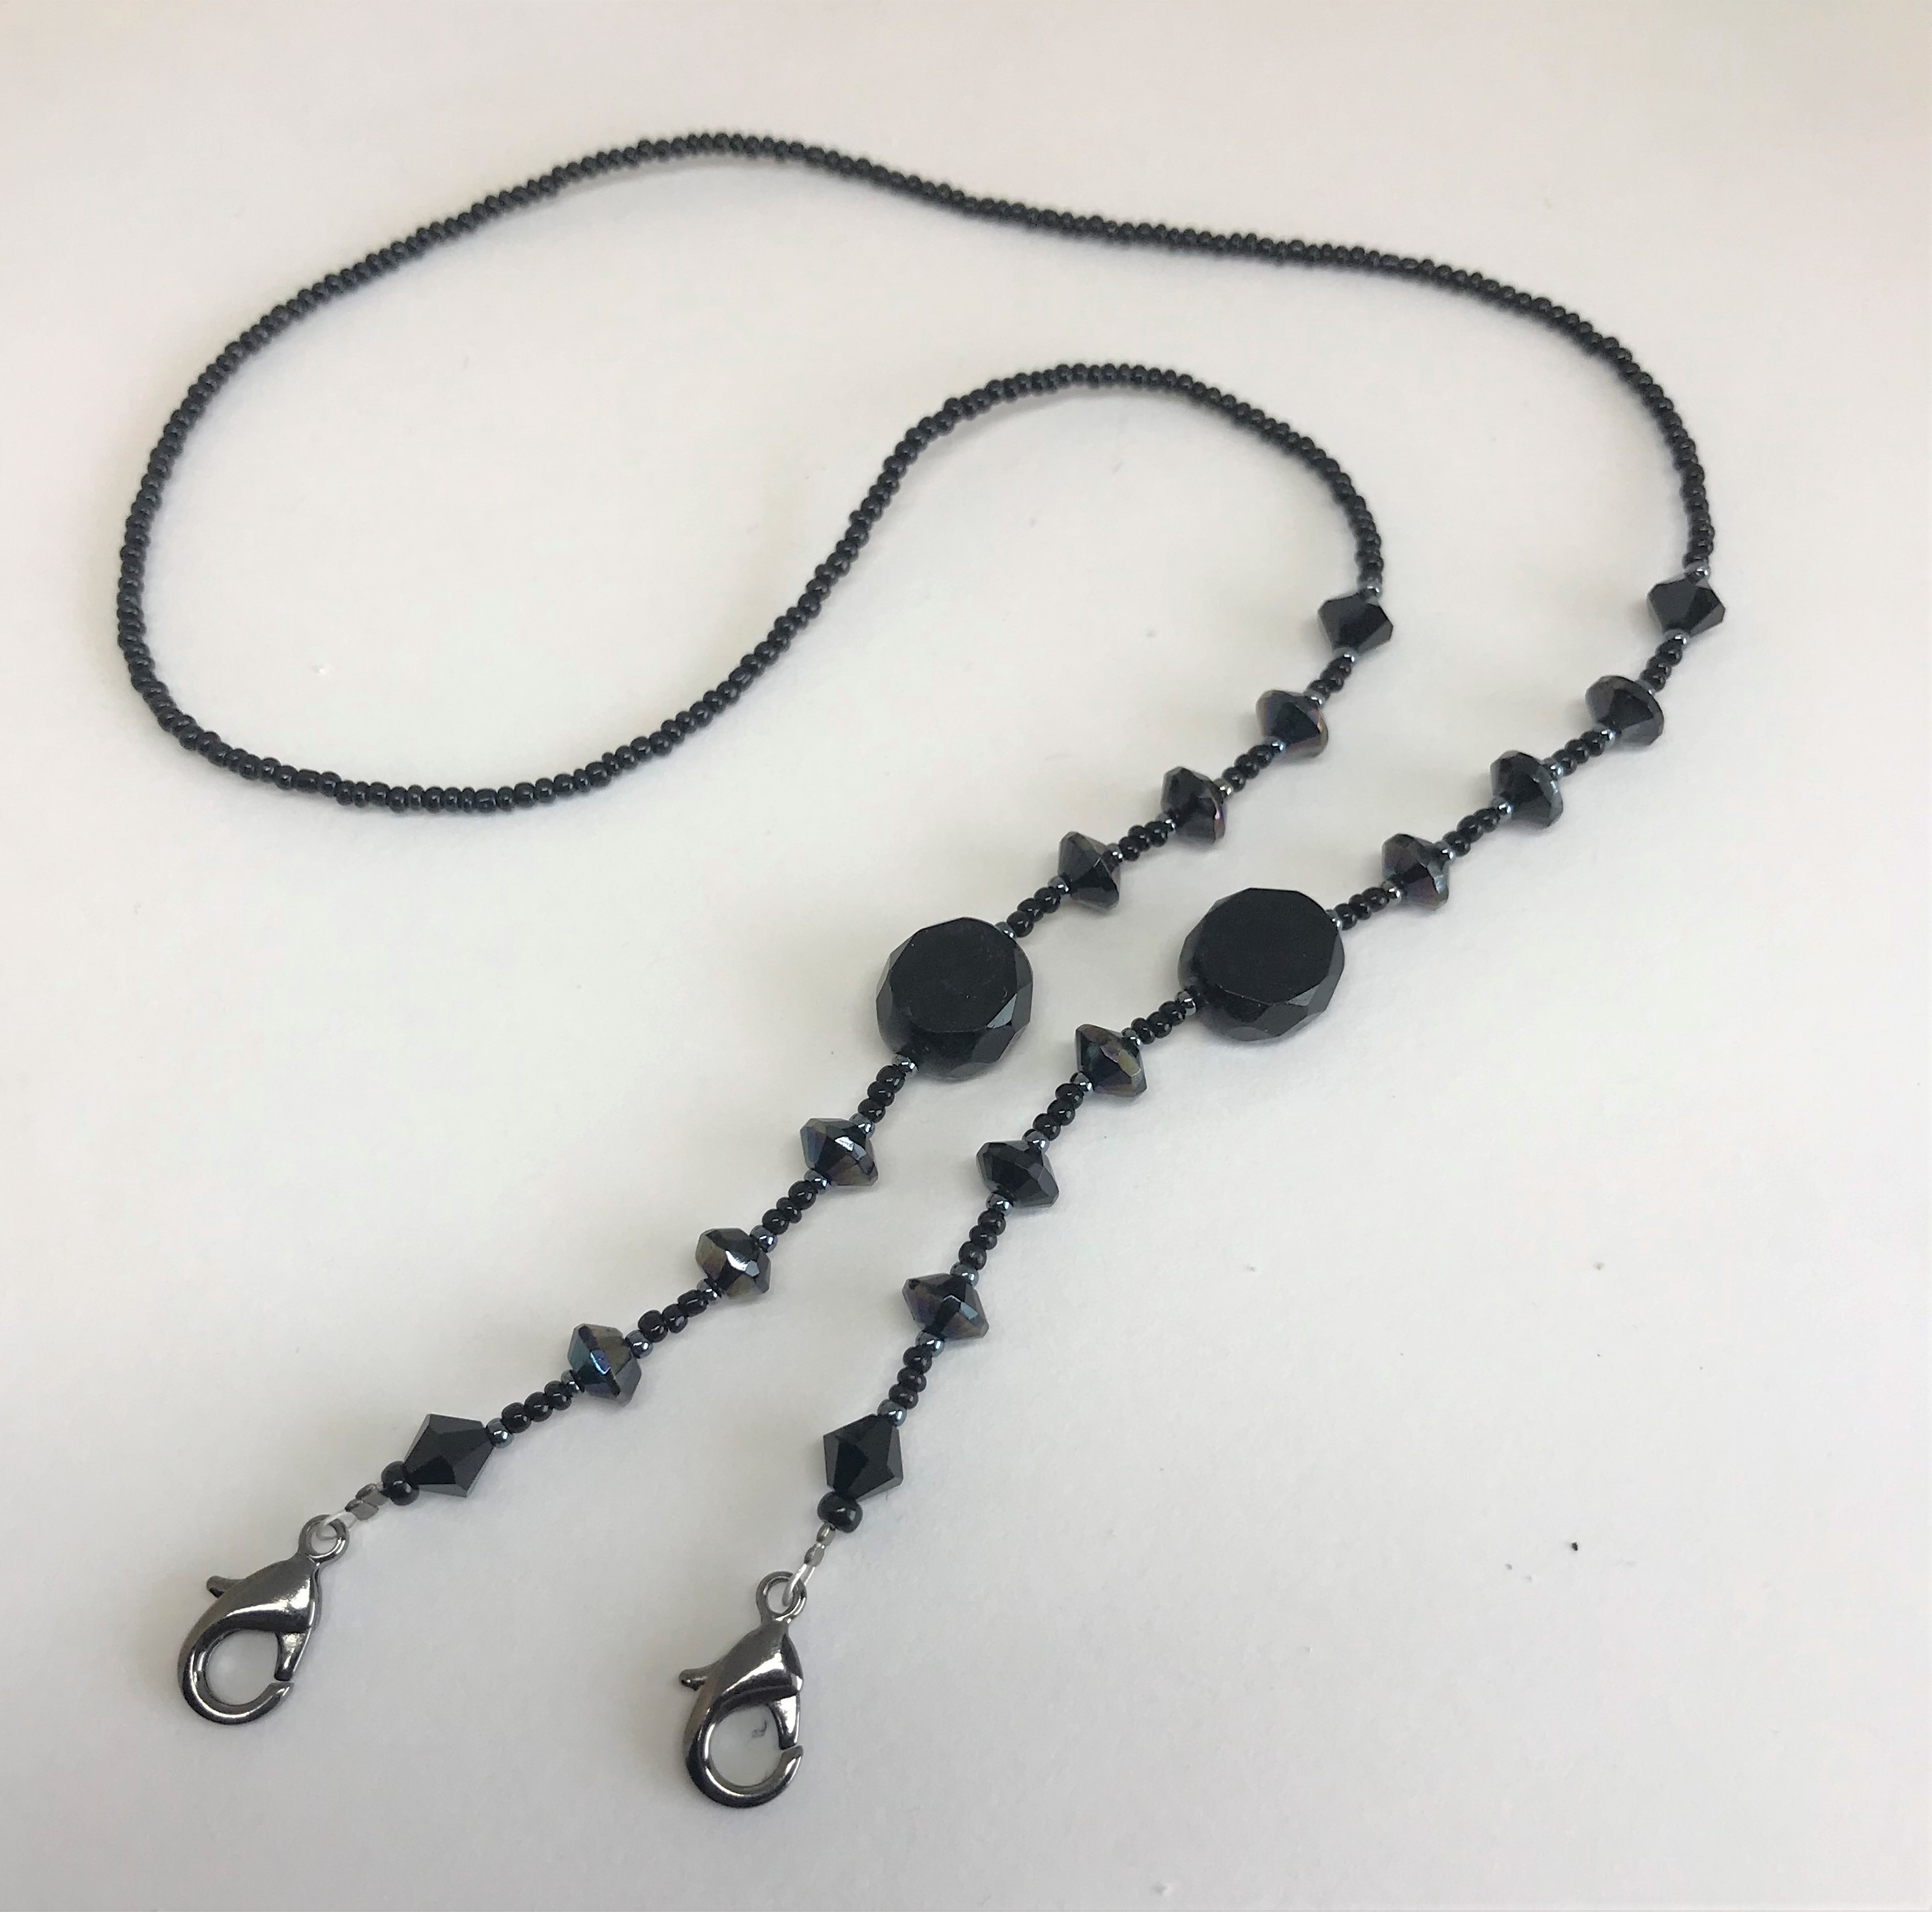 Face Mask Chain Black Clover Beads Jewelry Necklace Face Mask 